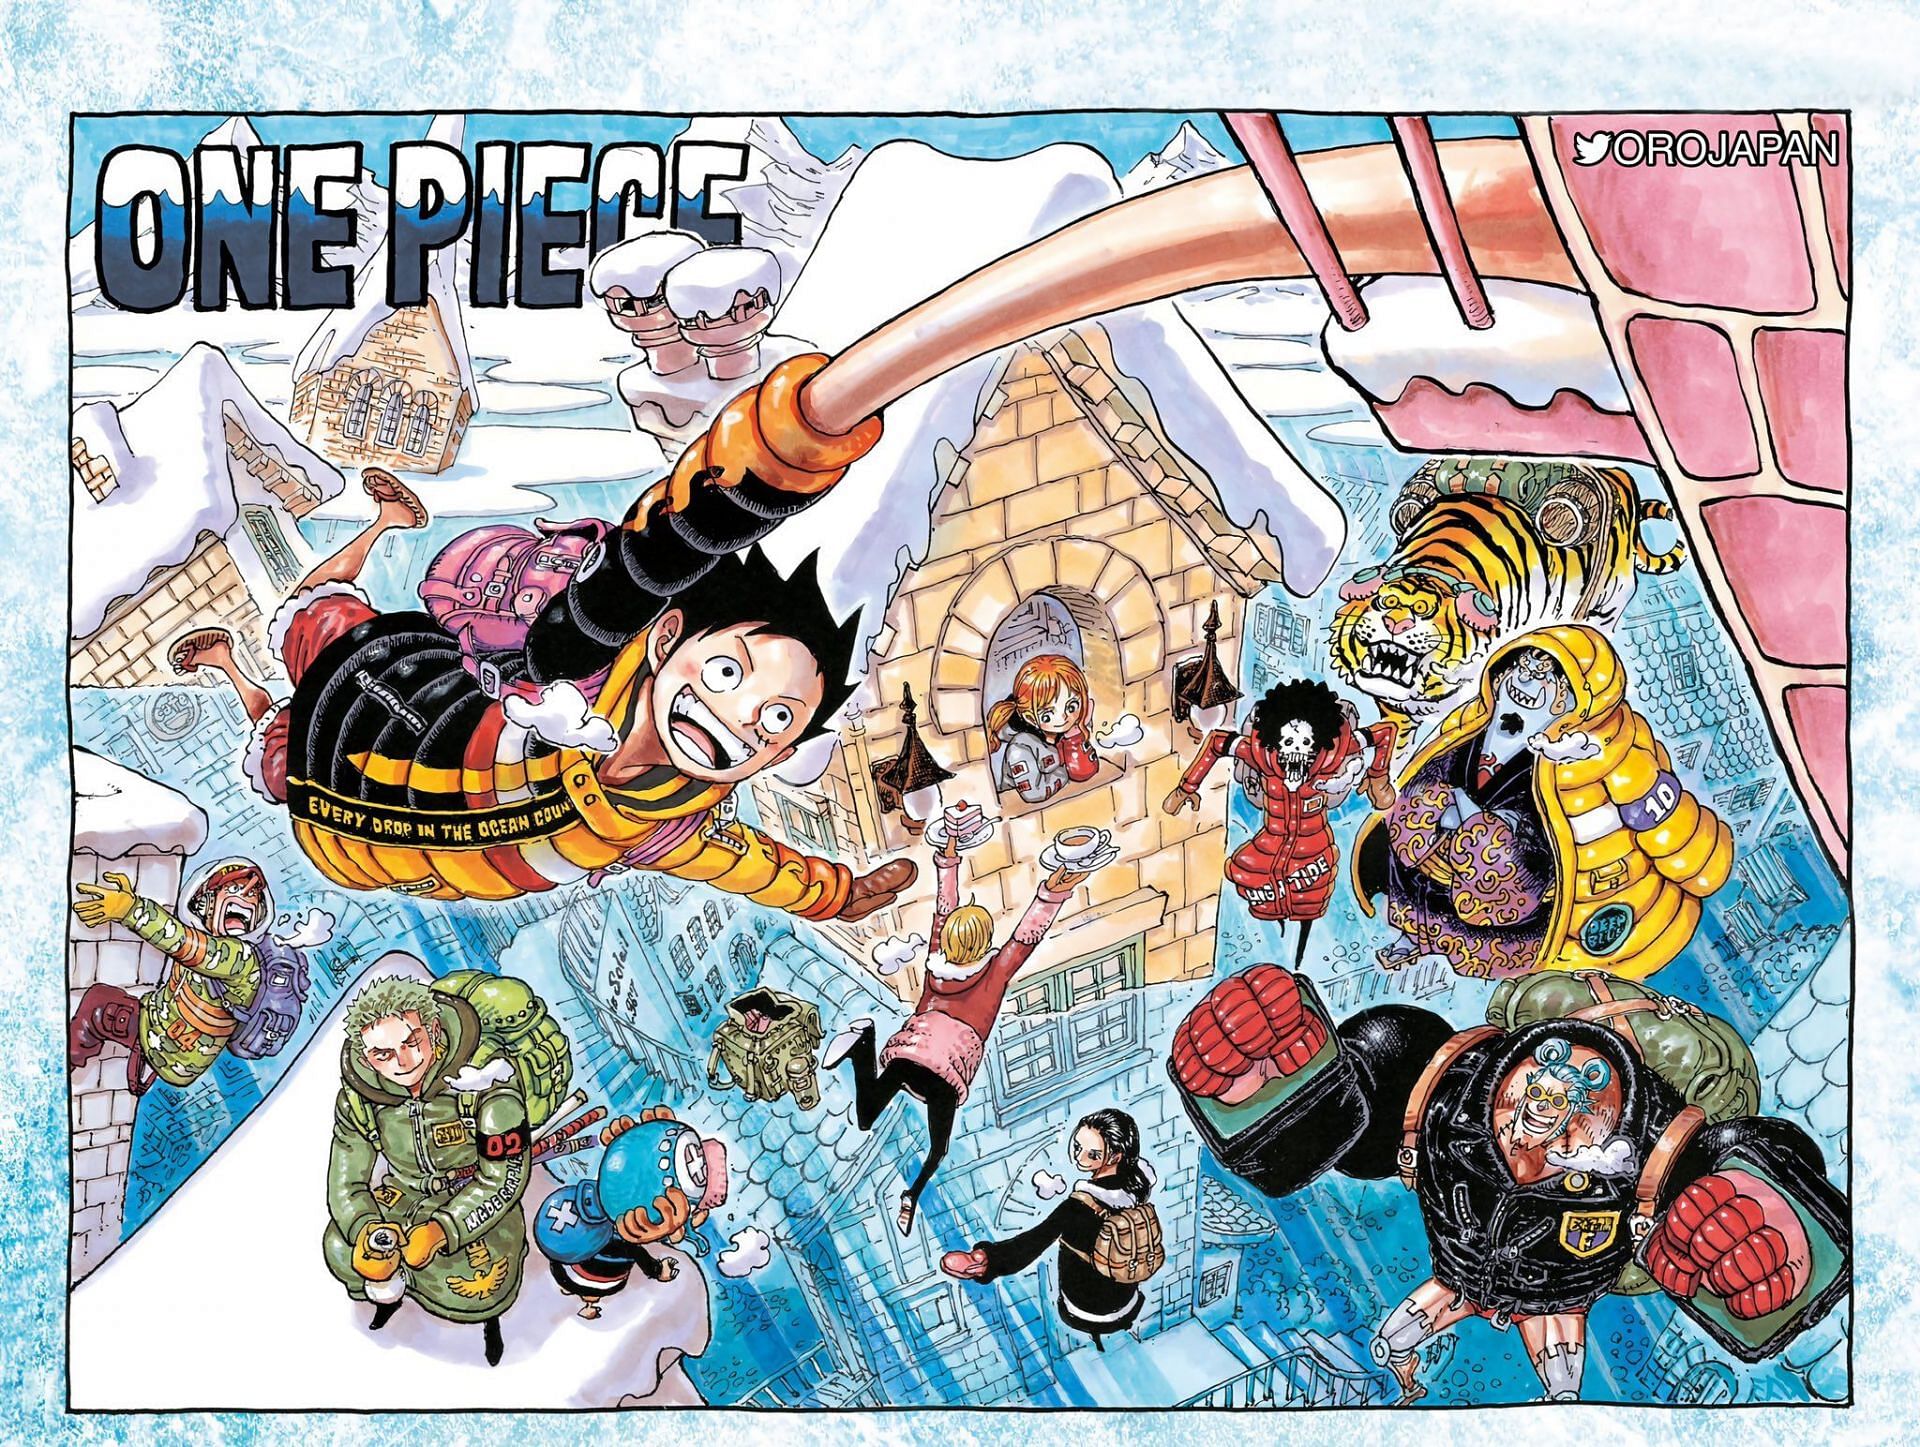 One Piece chapter 1036 cove illustration redrawn ( Image via OROJAPAN)